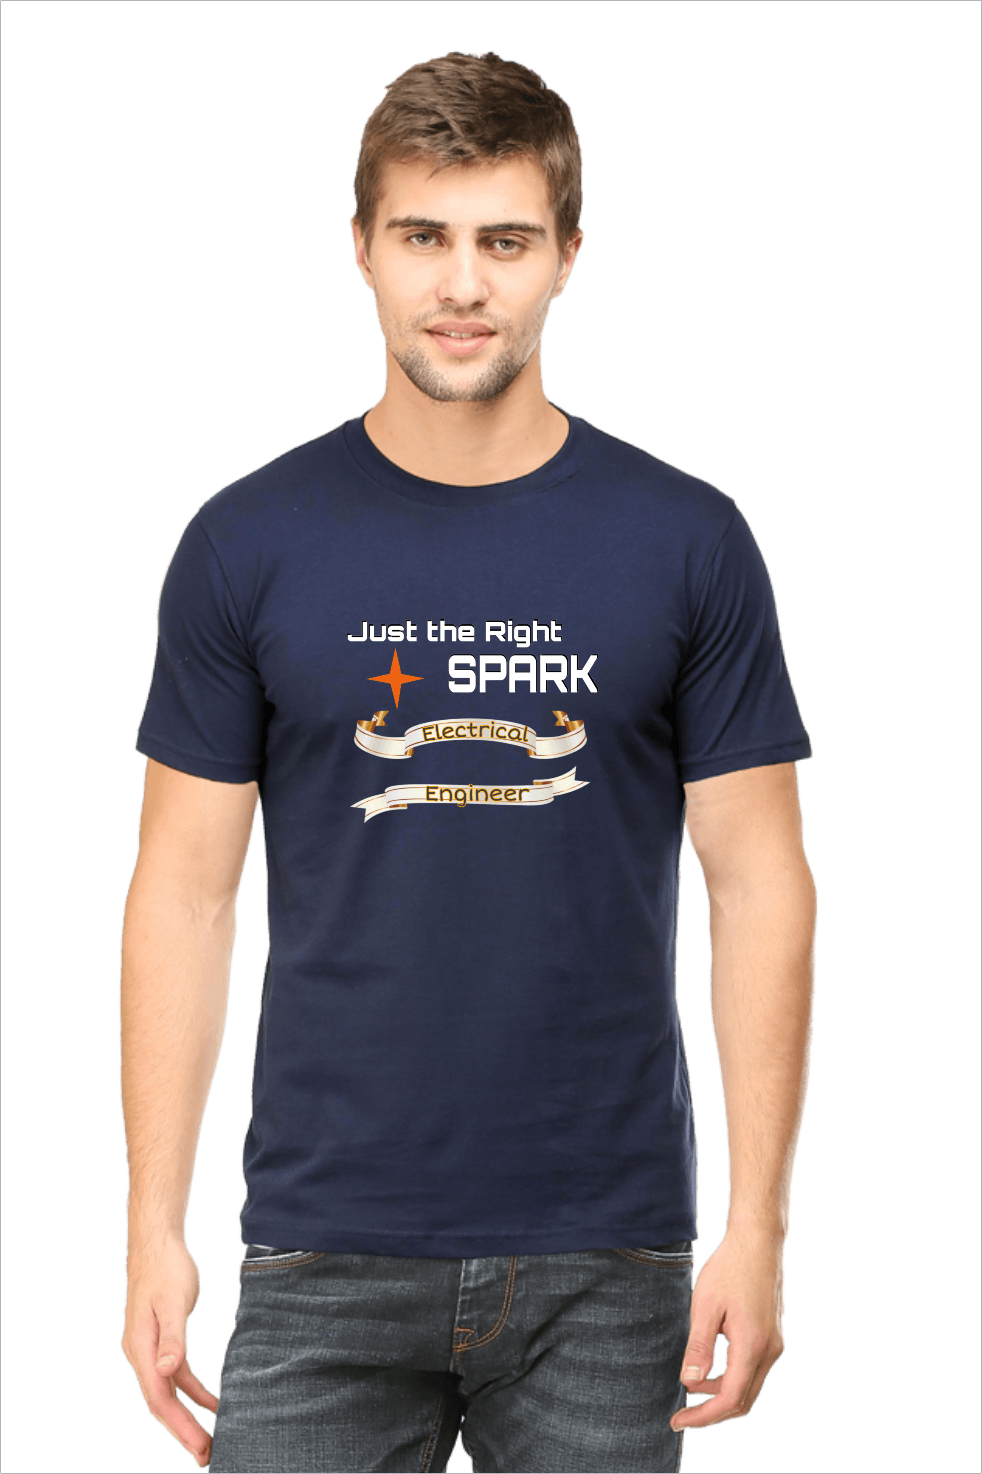 Navy Blue Cotton Tshirt for Electrical Engineers